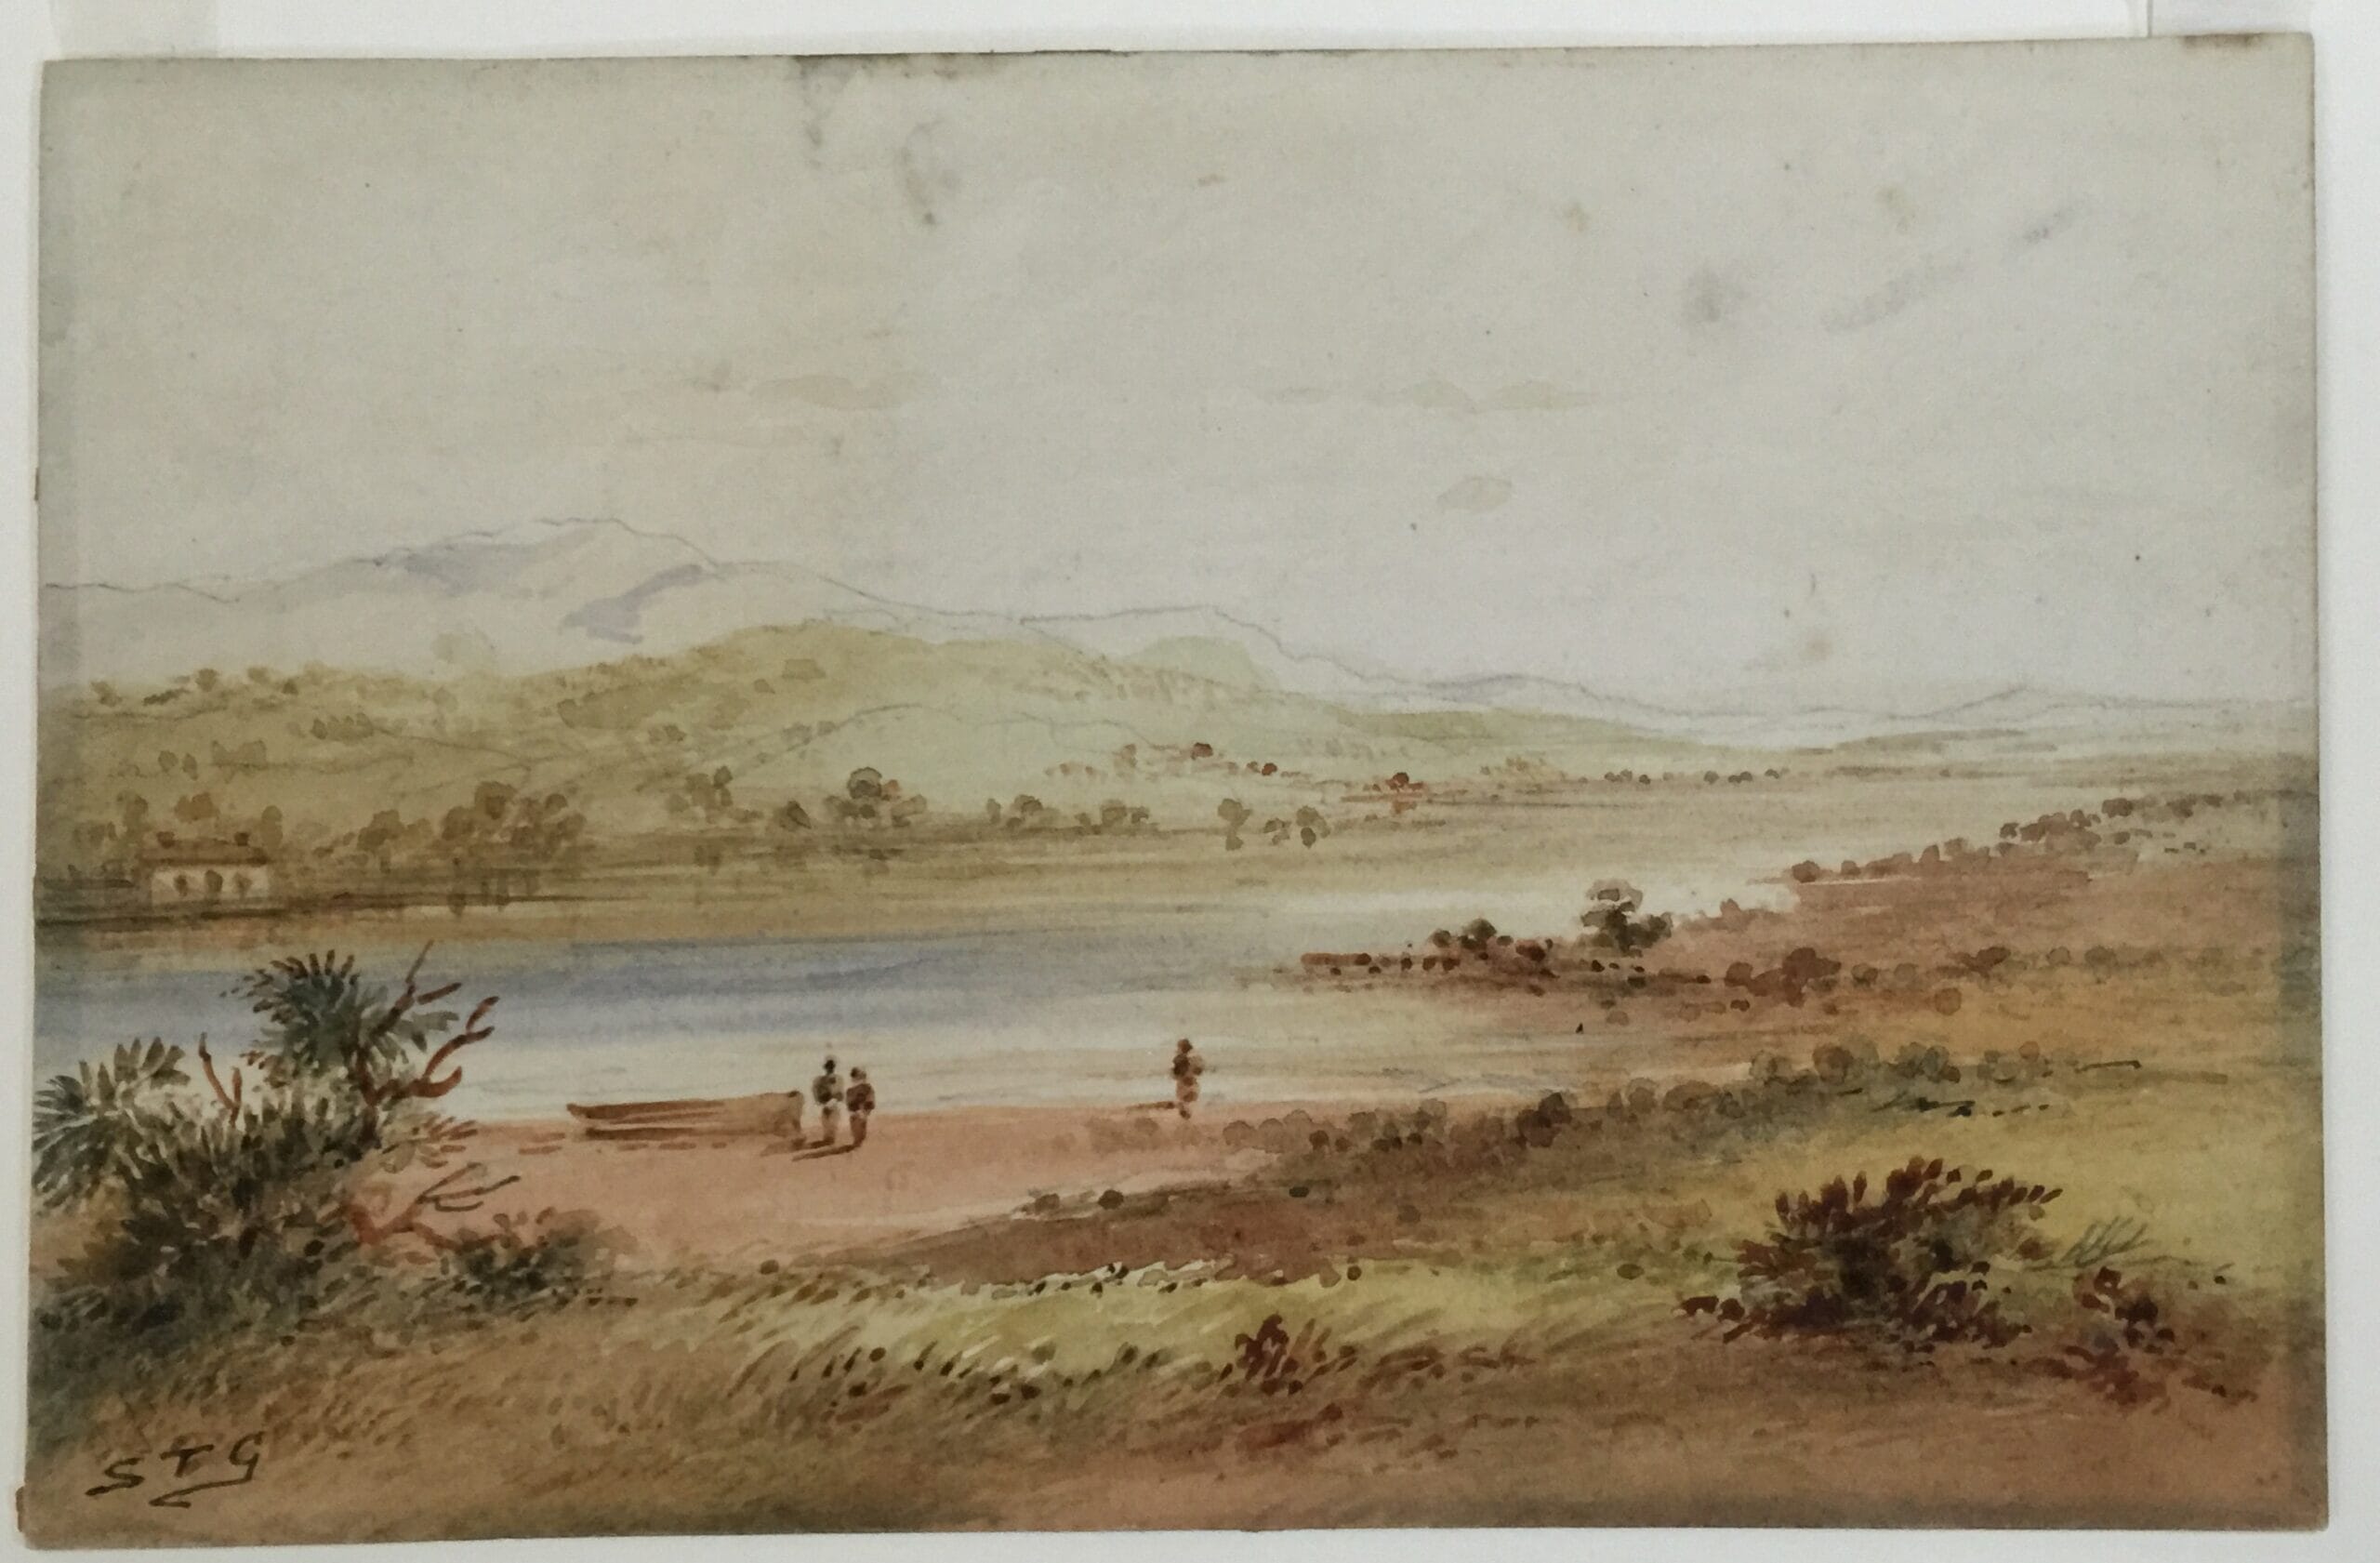 S.T.Gill, View on Cook's River, Near Sydney, poss. Tempe House, c. 1860-0